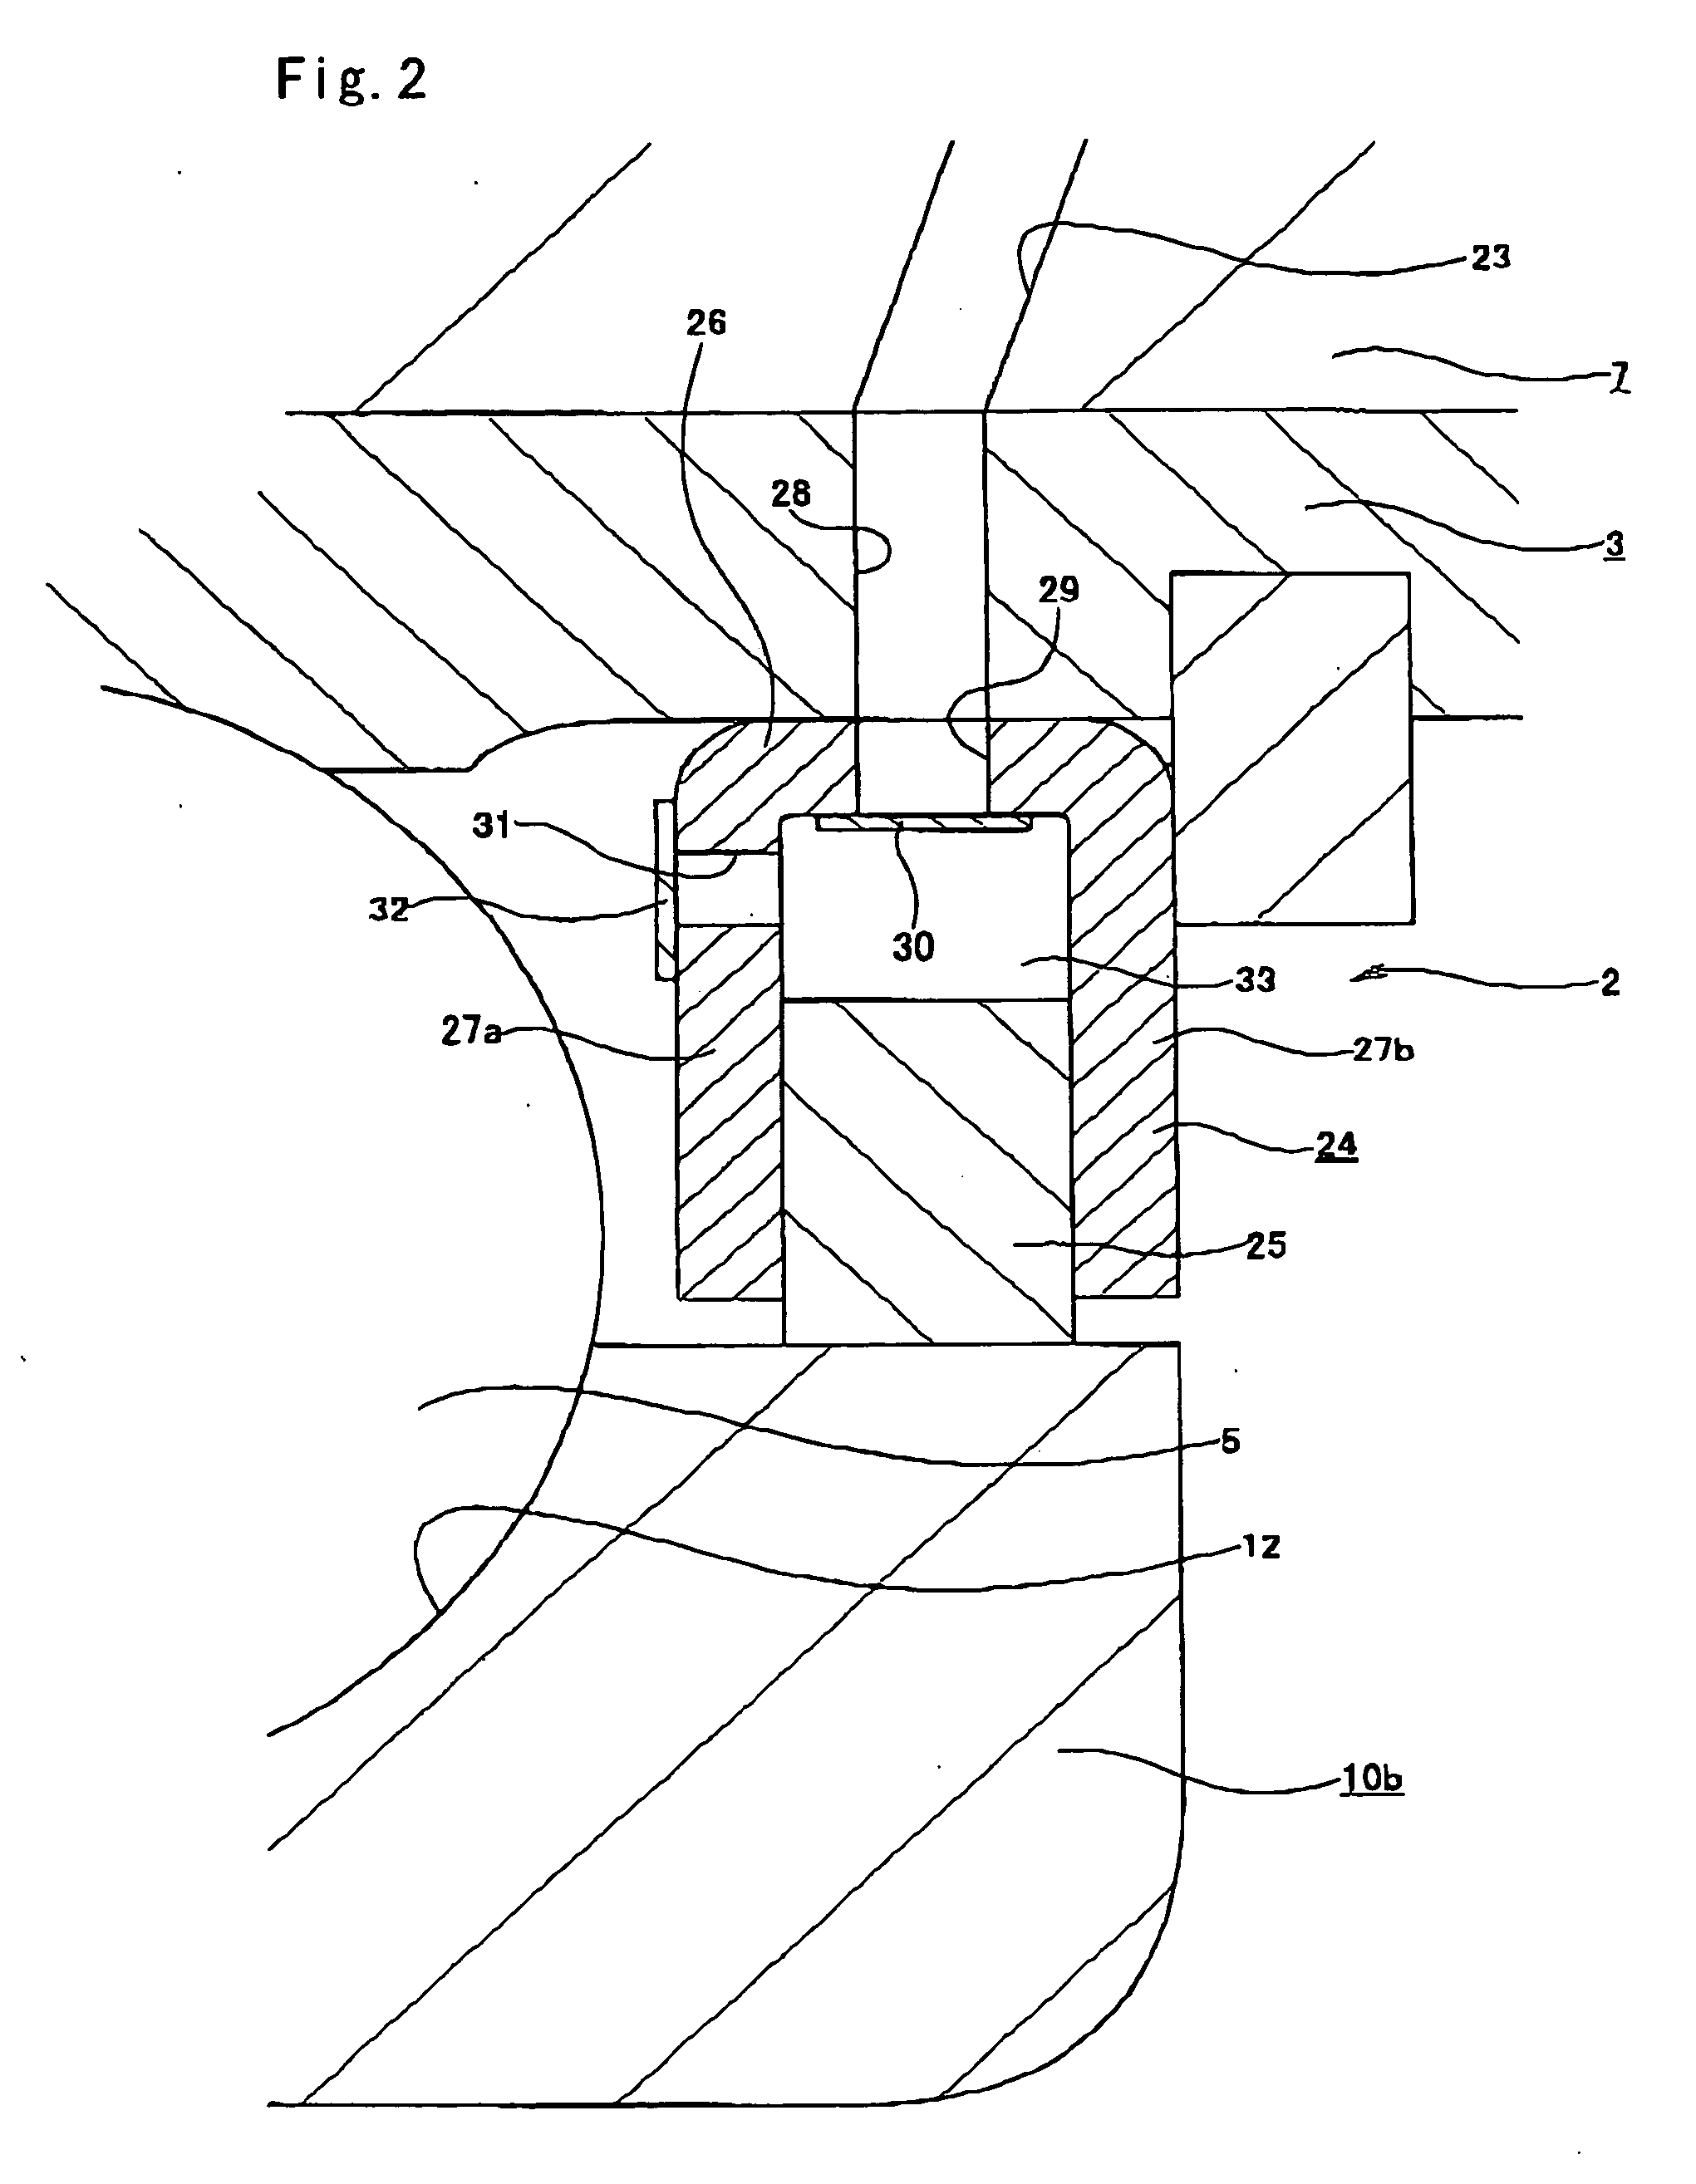 Rolling bearing unit for supporting a wheel with an air compressor